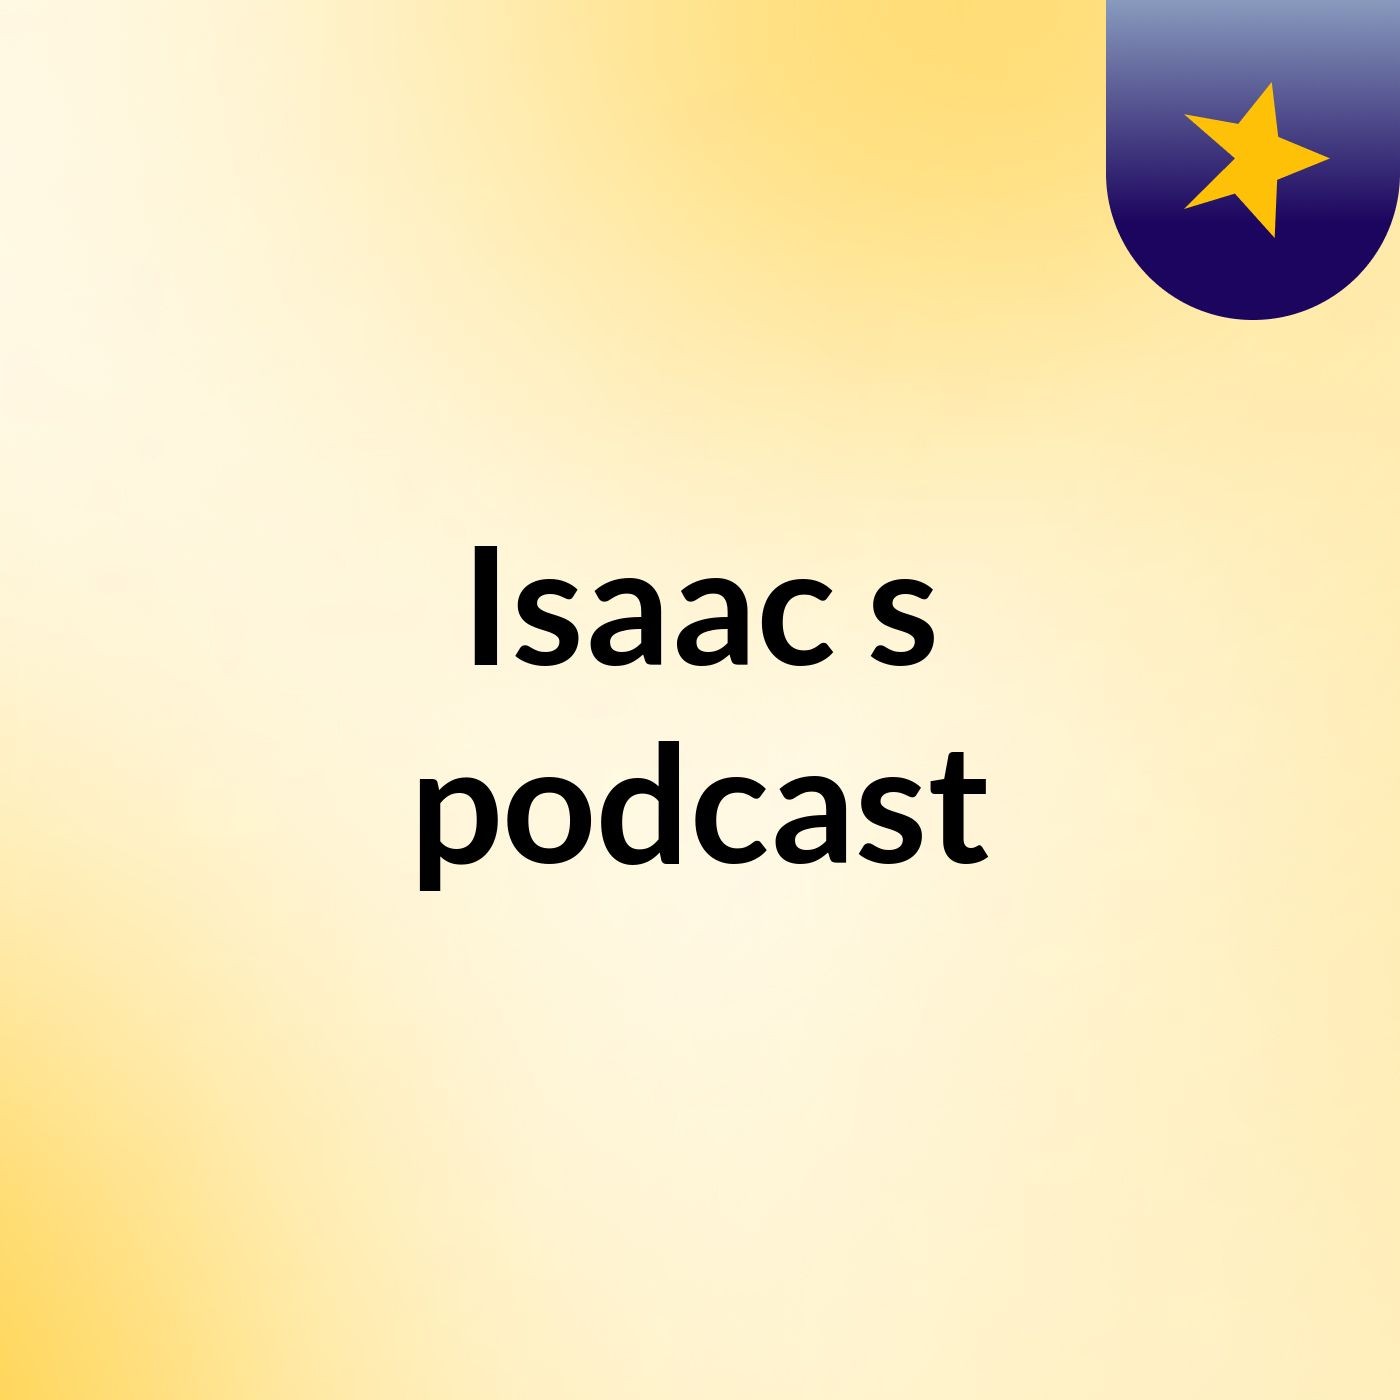 Episode 3 - Isaac's podcast